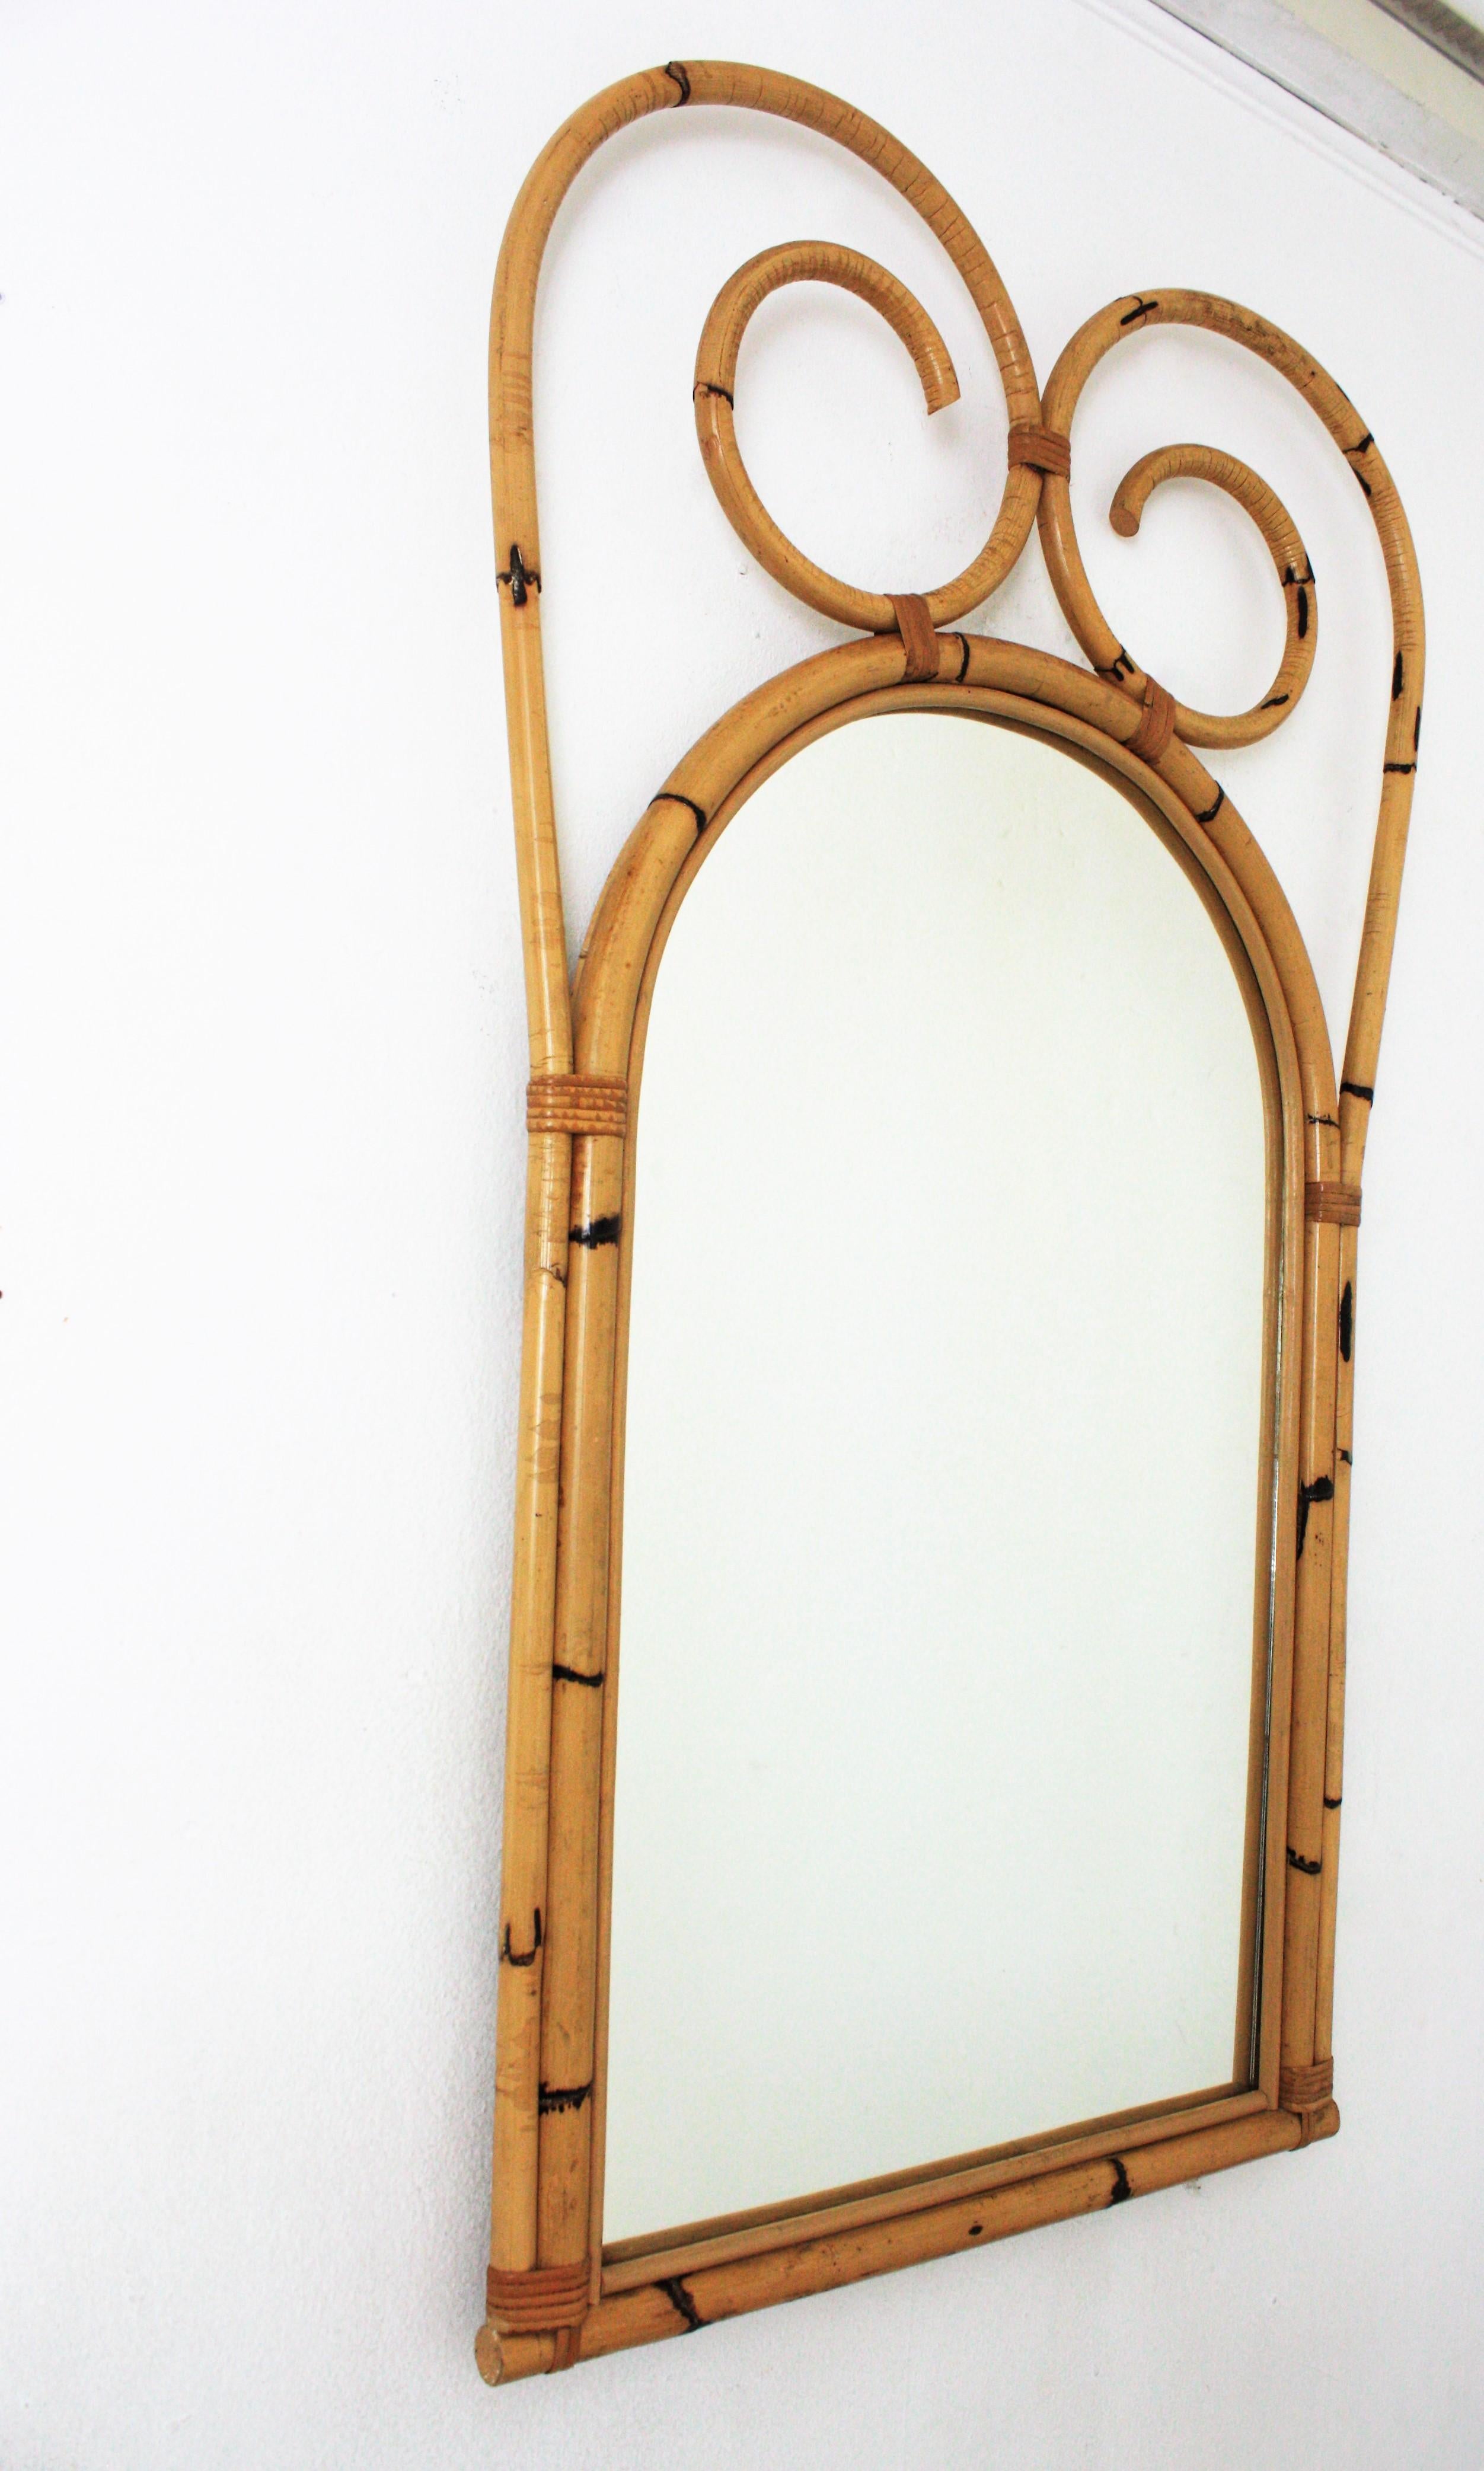 Large Rattan Bamboo Wall Mirror with Scroll Top, Italian Designer, 1950s For Sale 1